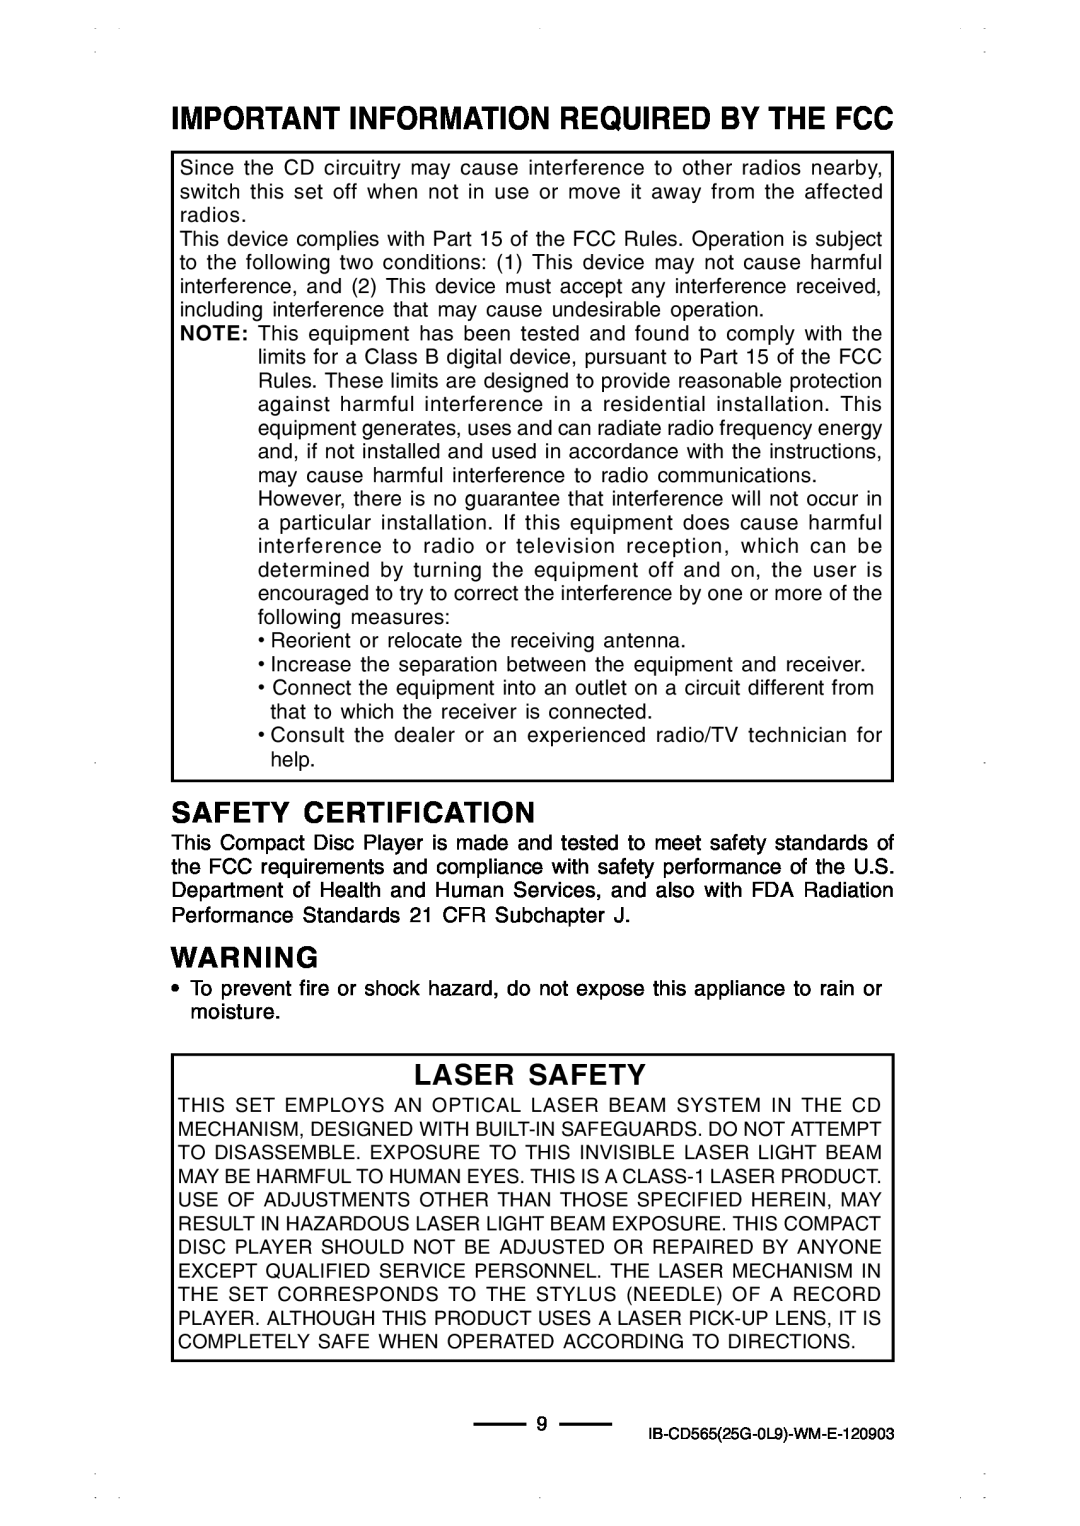 Lenoxx Electronics CD-565 Important Information Required By The Fcc, Safety Certification, Laser Safety 